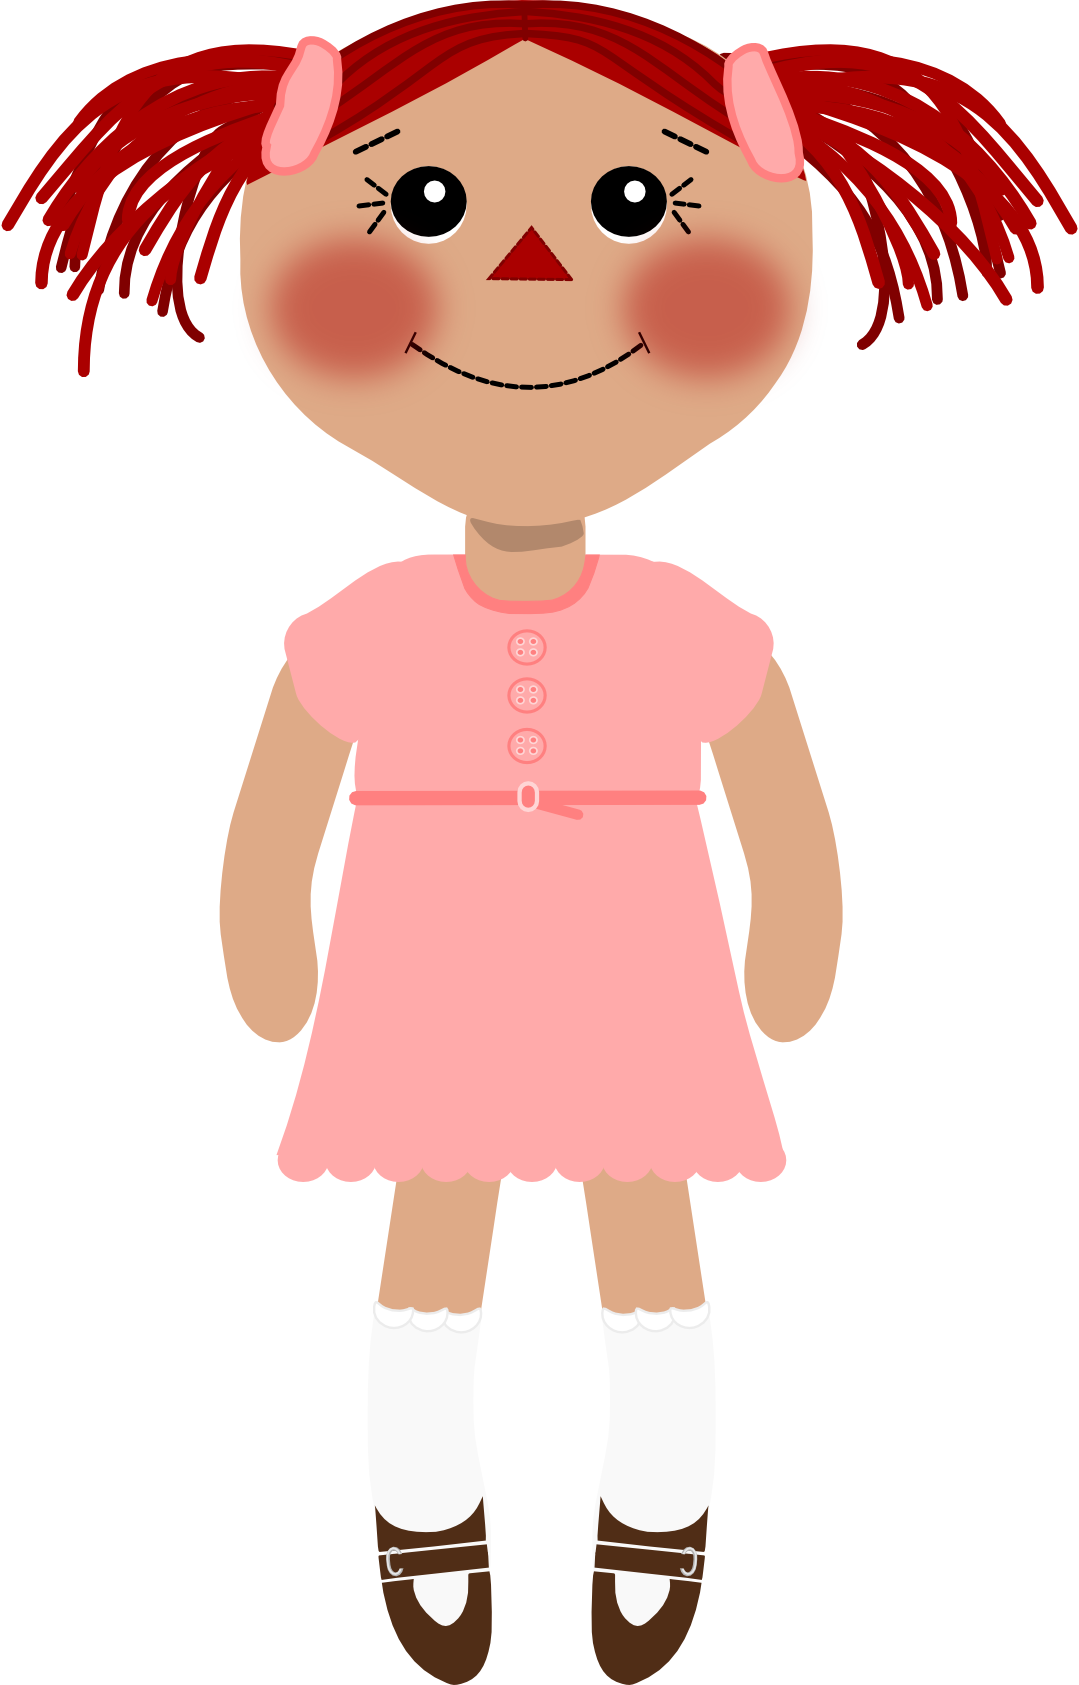 clipart of a doll - photo #24